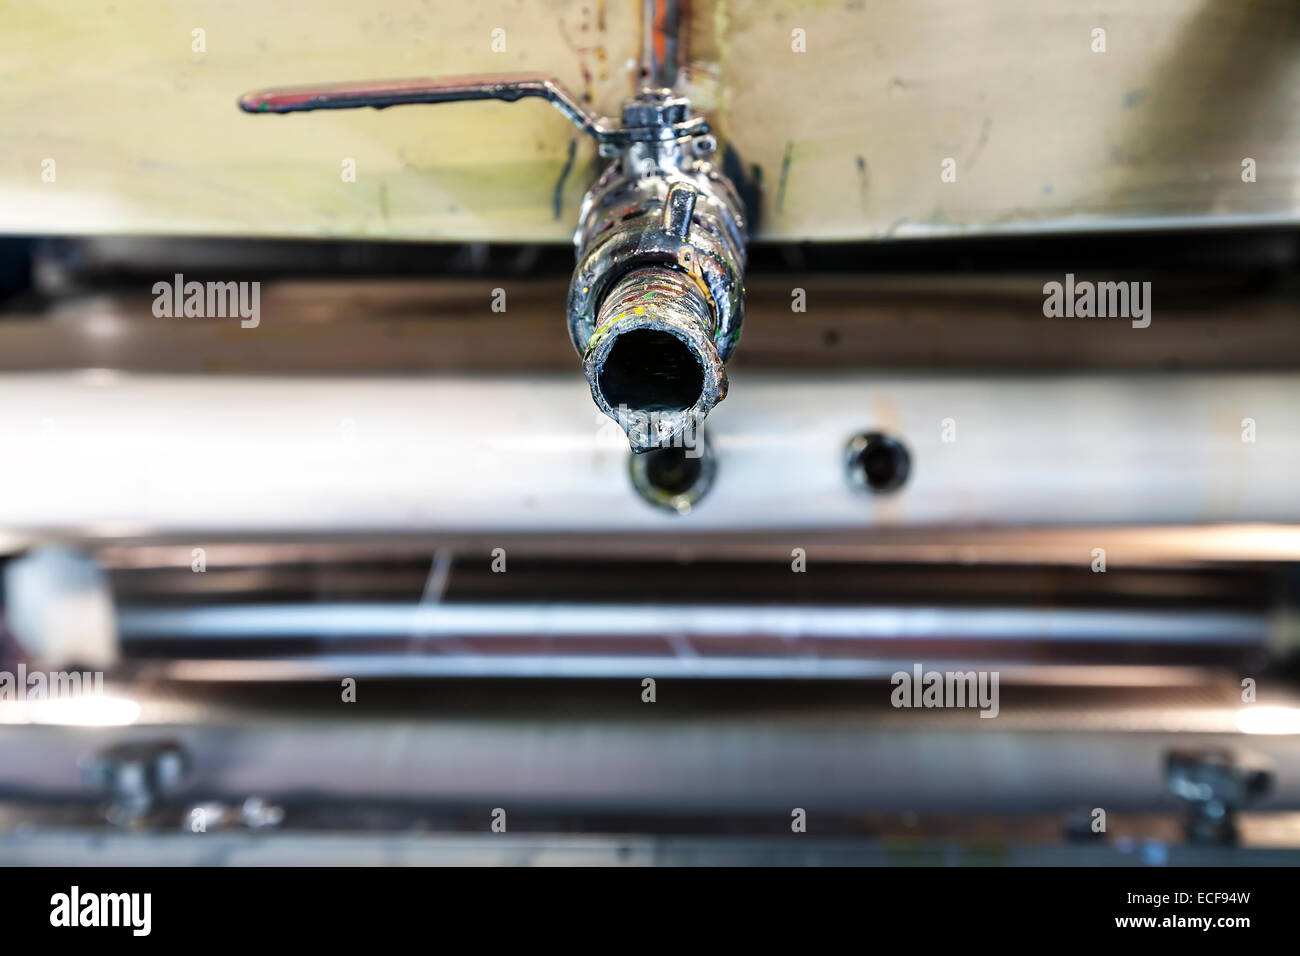 Offset printer for labels and flexible packaging, Stock Photo